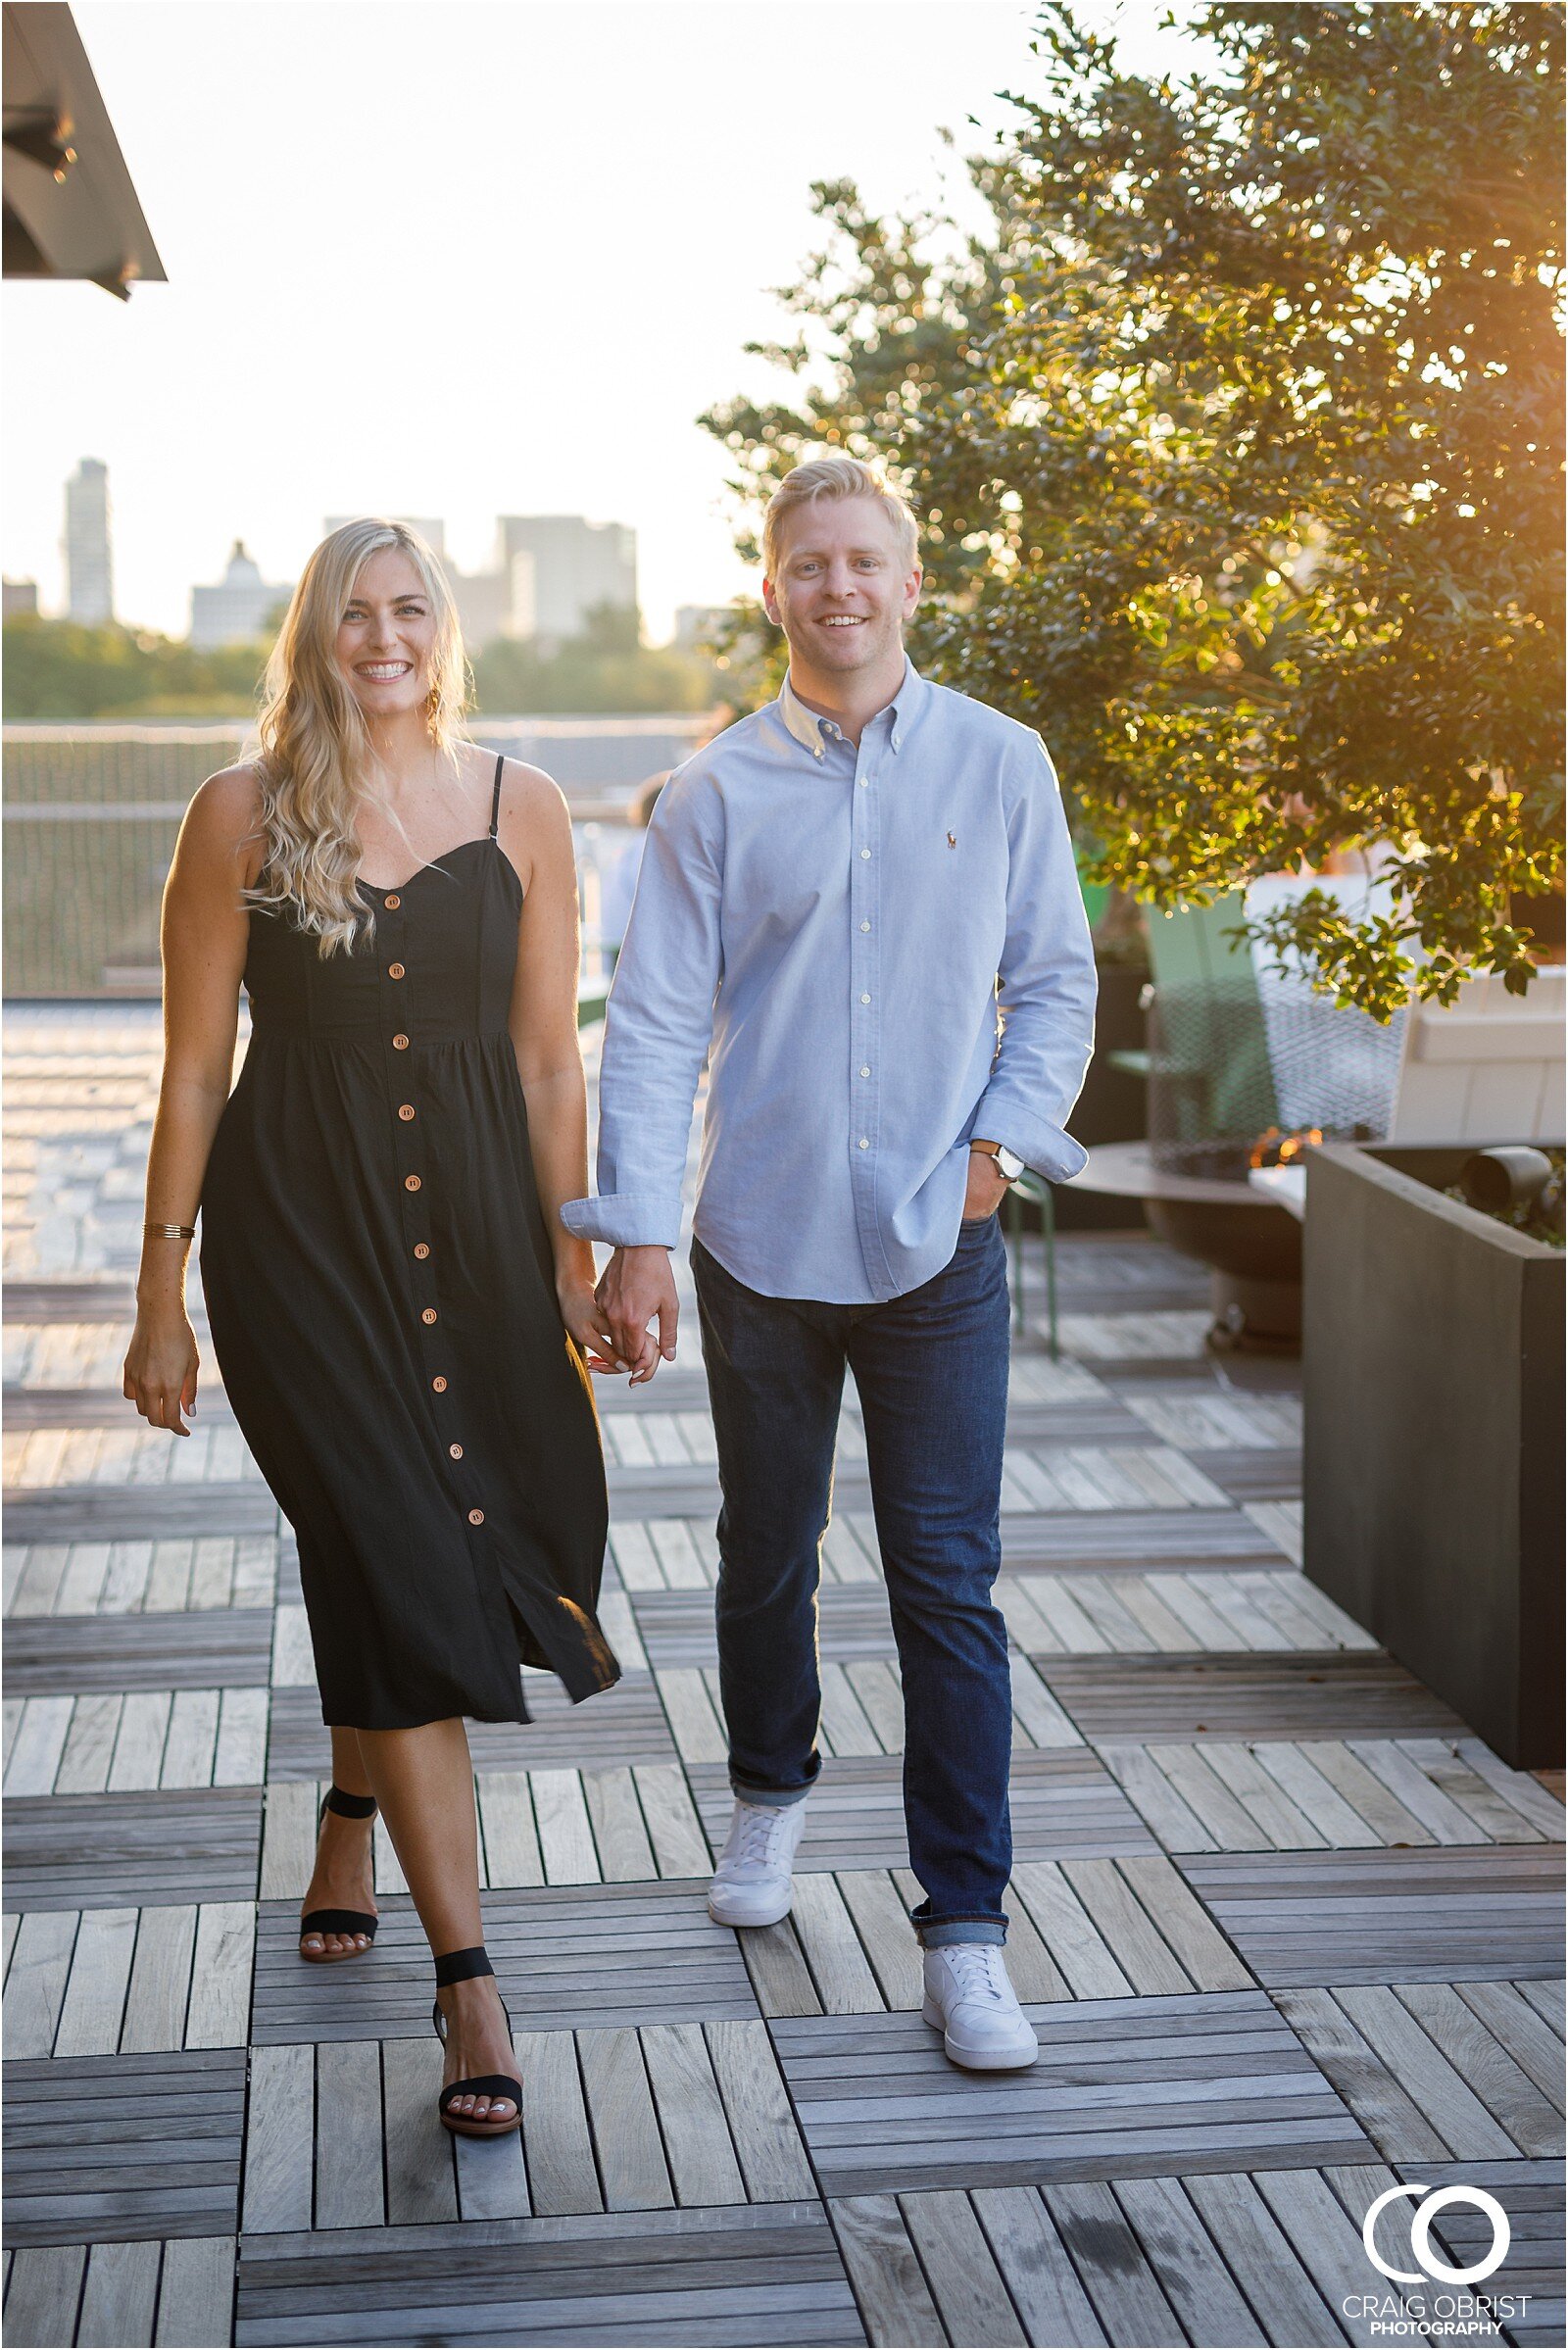 Cator Woolford Ponce city market rooftop sunset engagement portraits atlanta_0050.jpg